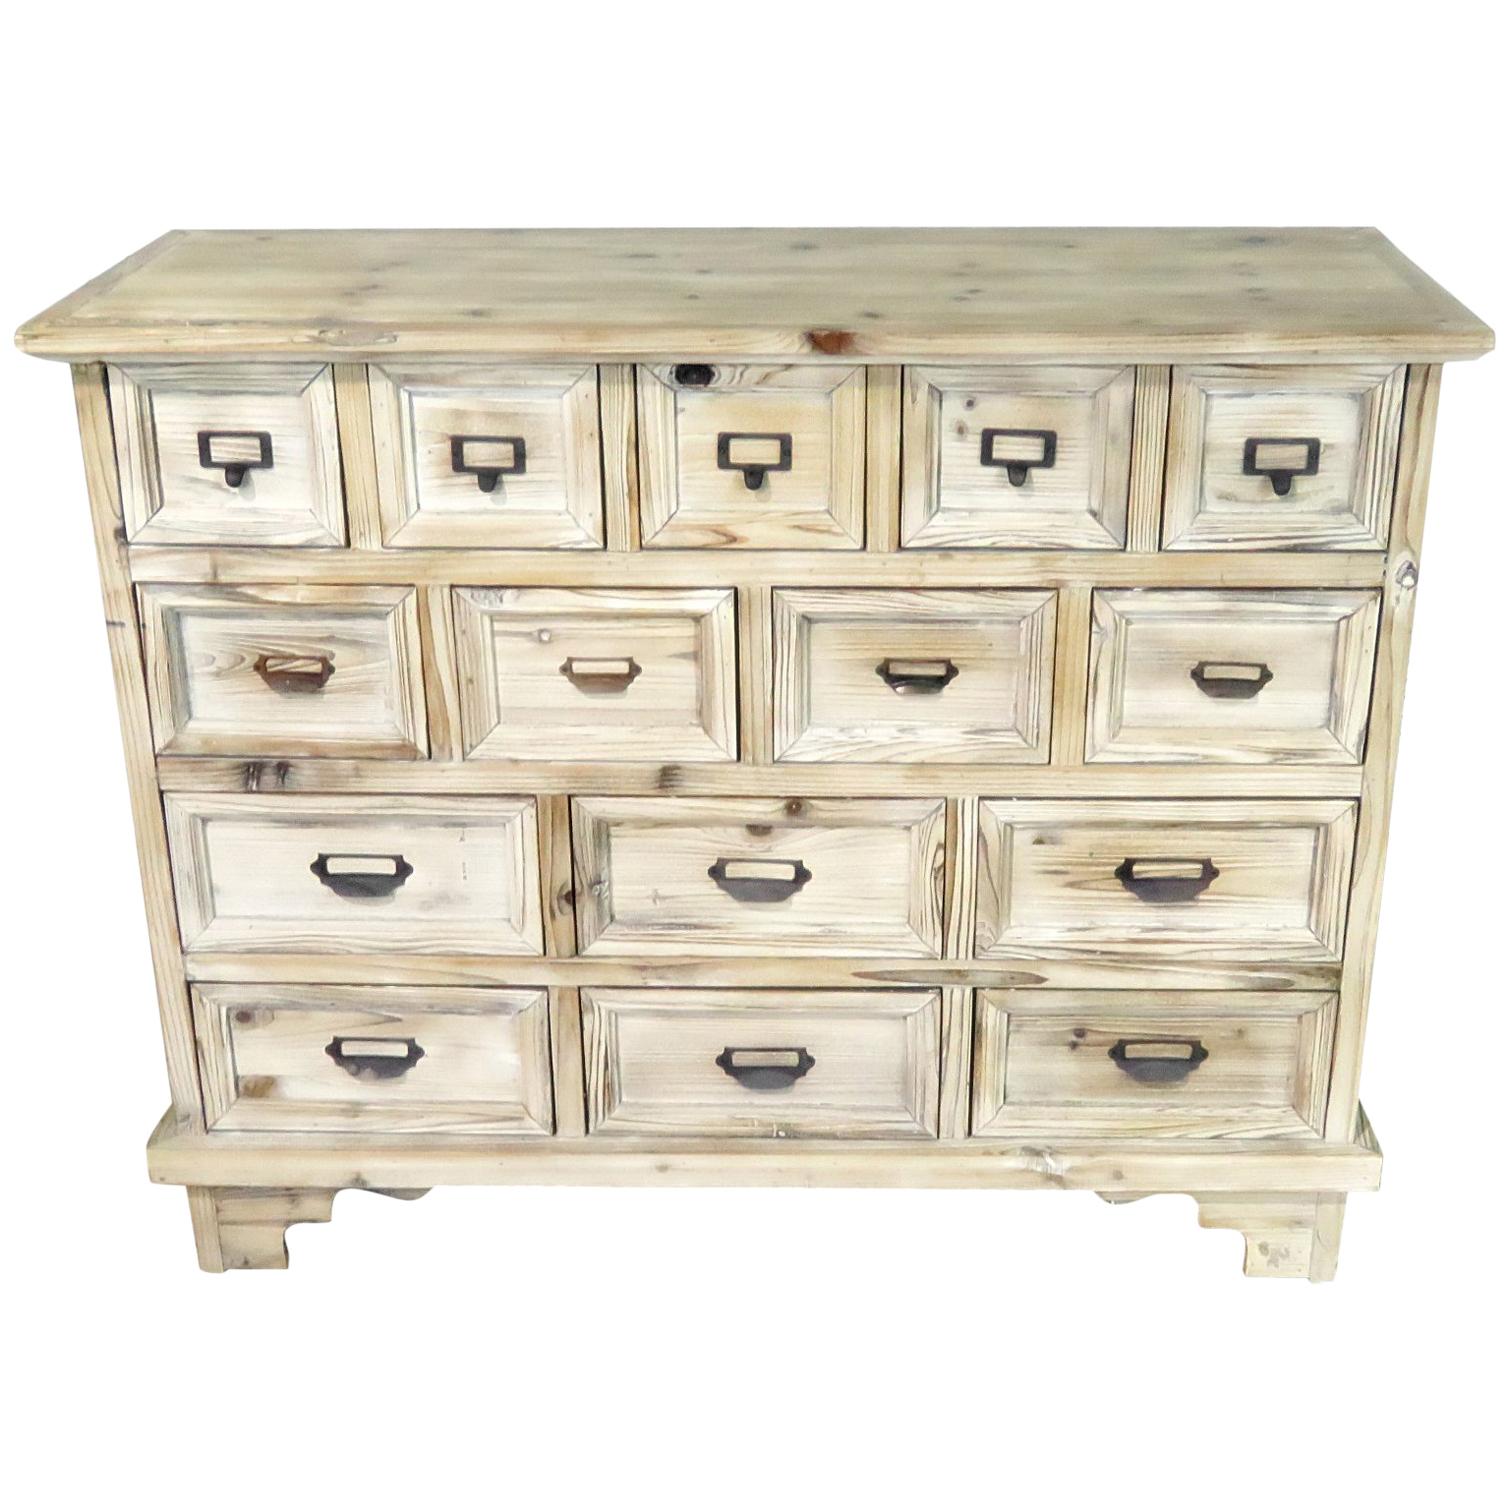 Multi Drawer Apothecary Style Dresser in Distressed White Paint